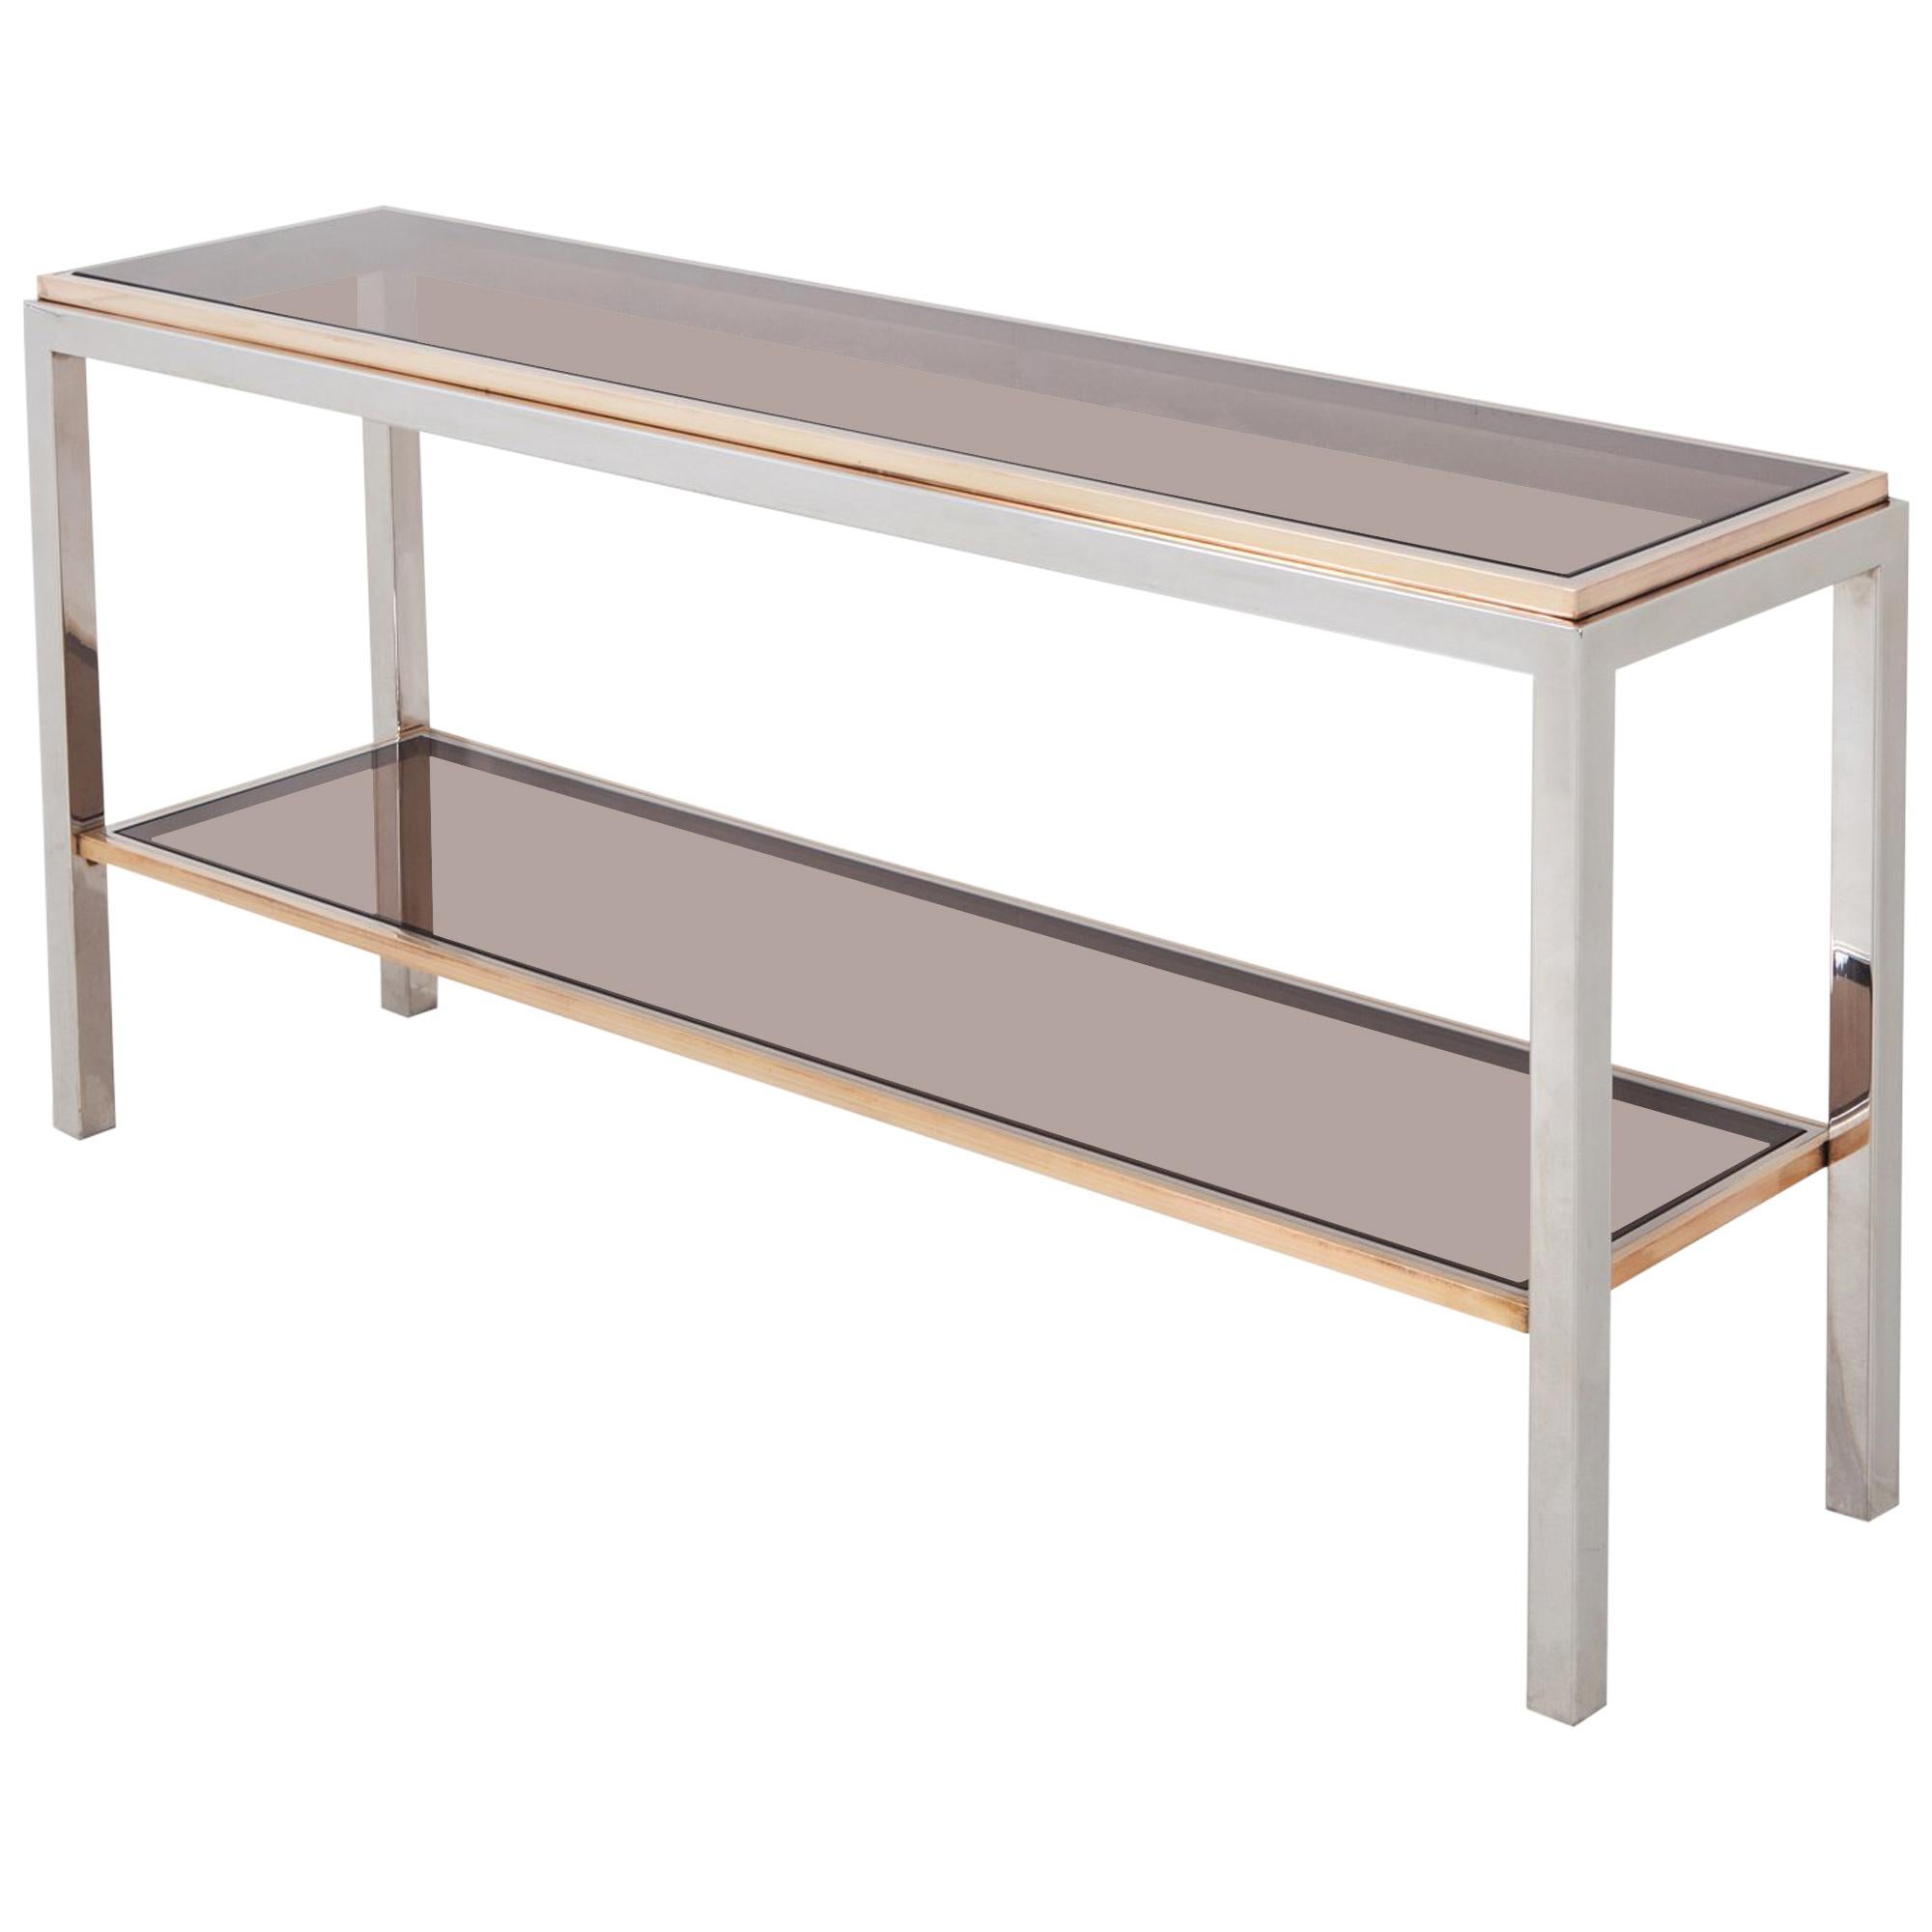 Willy Rizzo Two-Tier Console Table in Chrome and Brass Linea Flaminia